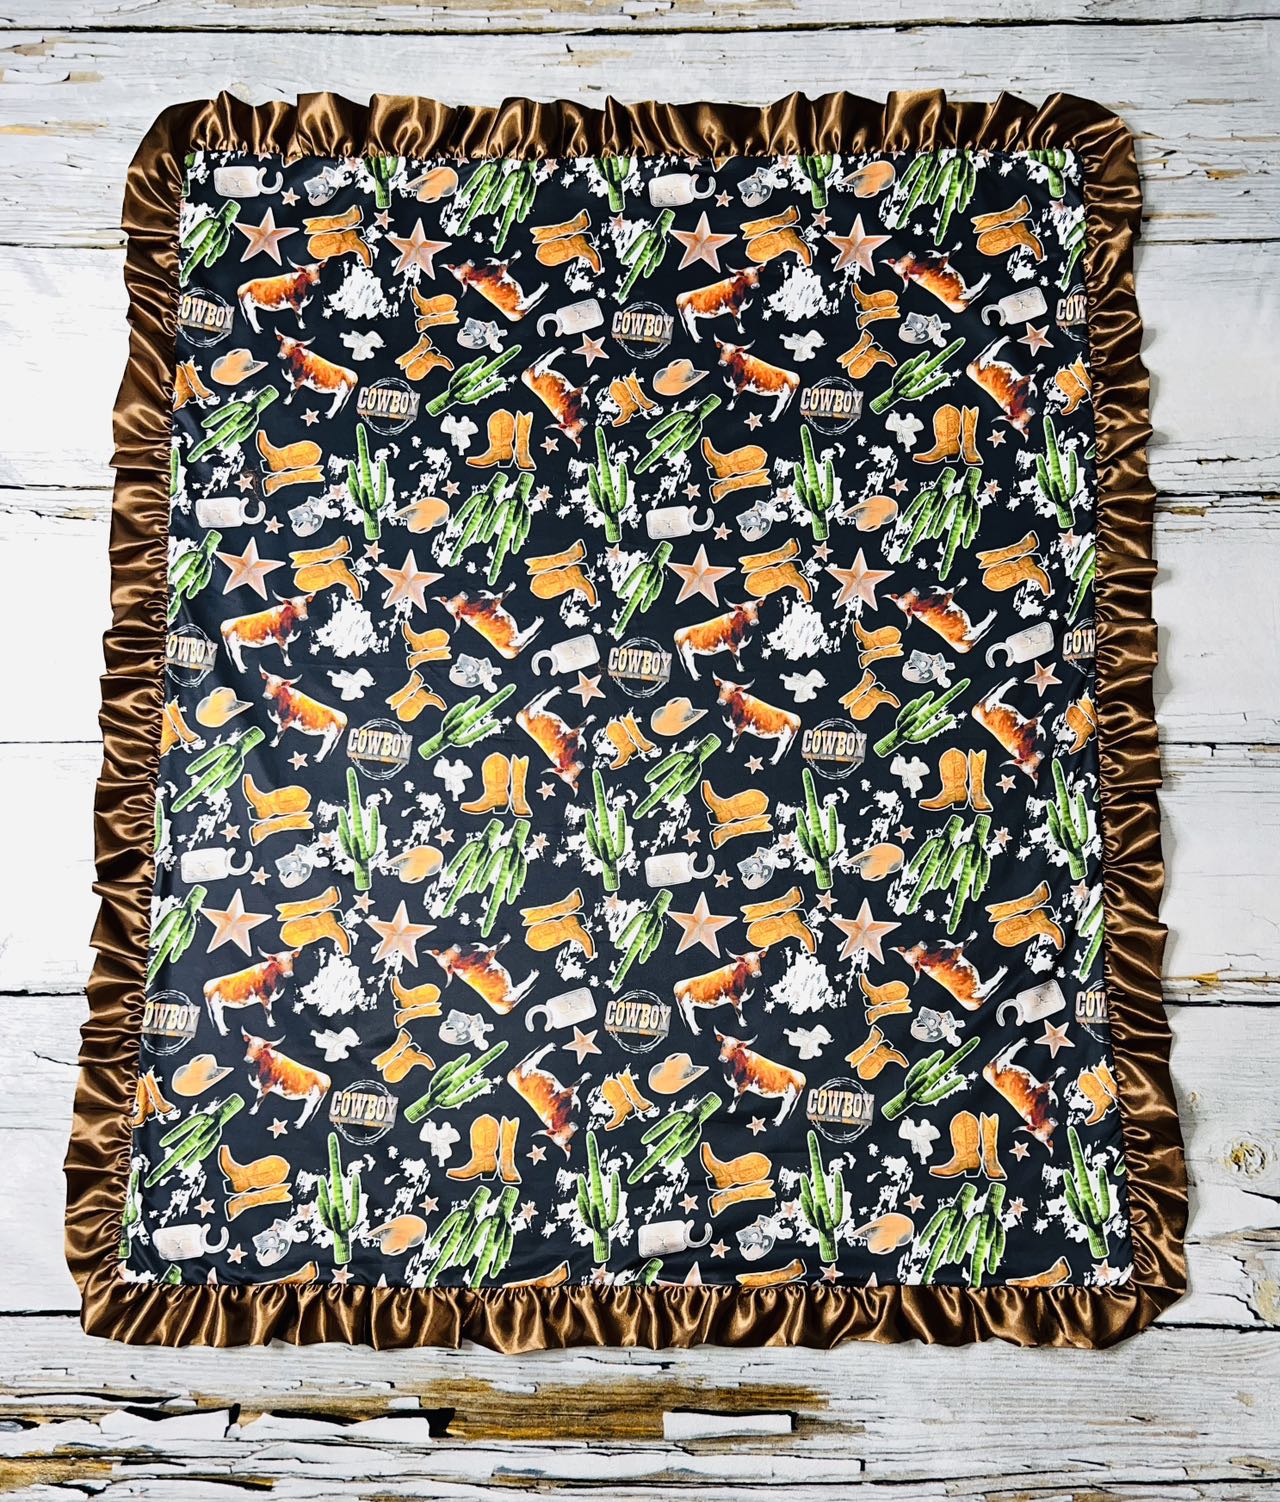 Brown/black cow, cowboy, boots, & cactus minky baby blanket DLH1215-19